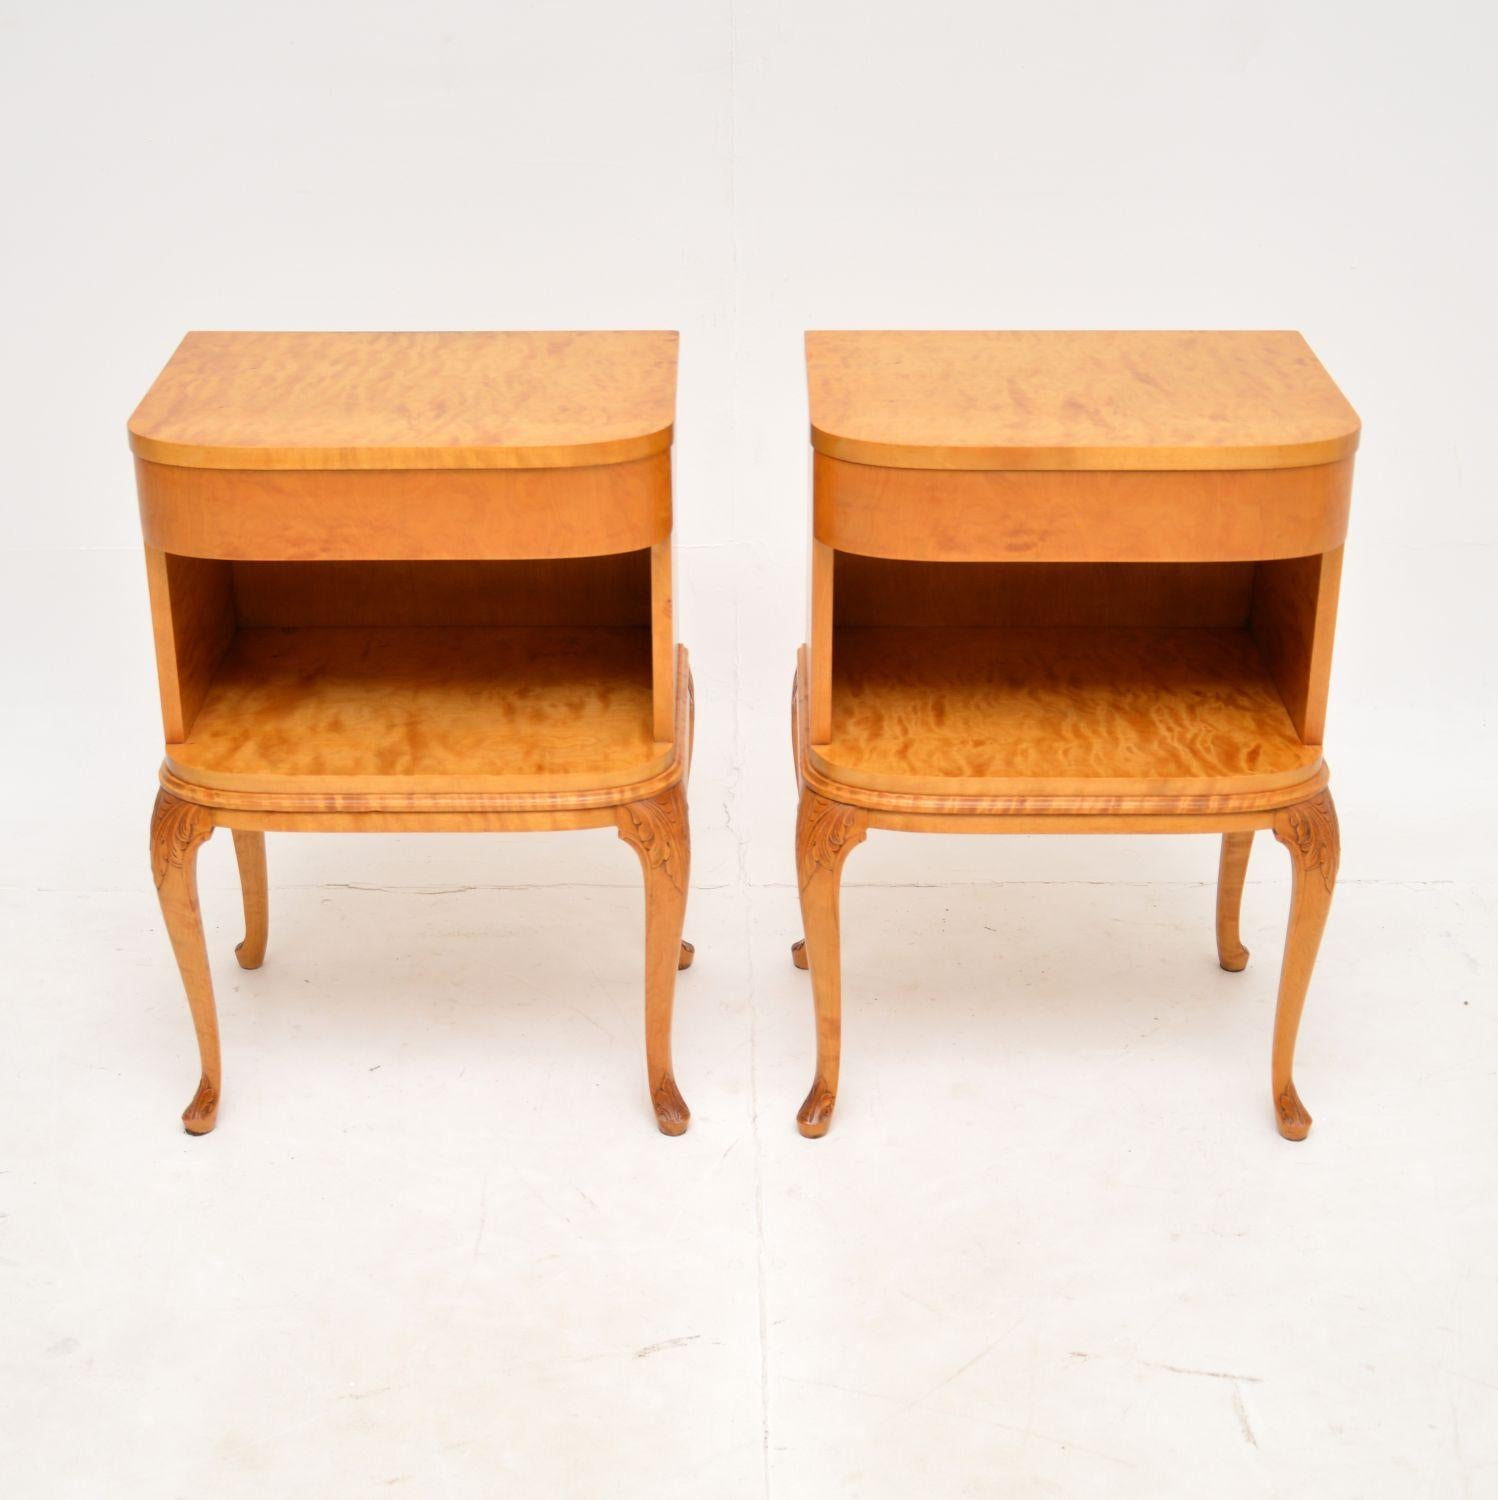 A stunning pair of antique Swedish bedside tables in satin birch. They were recently imported from Sweden, they date from the 1900-1920 period.

They are of magnificent quality, with a very beautiful and elegant design. There is crisp carving on